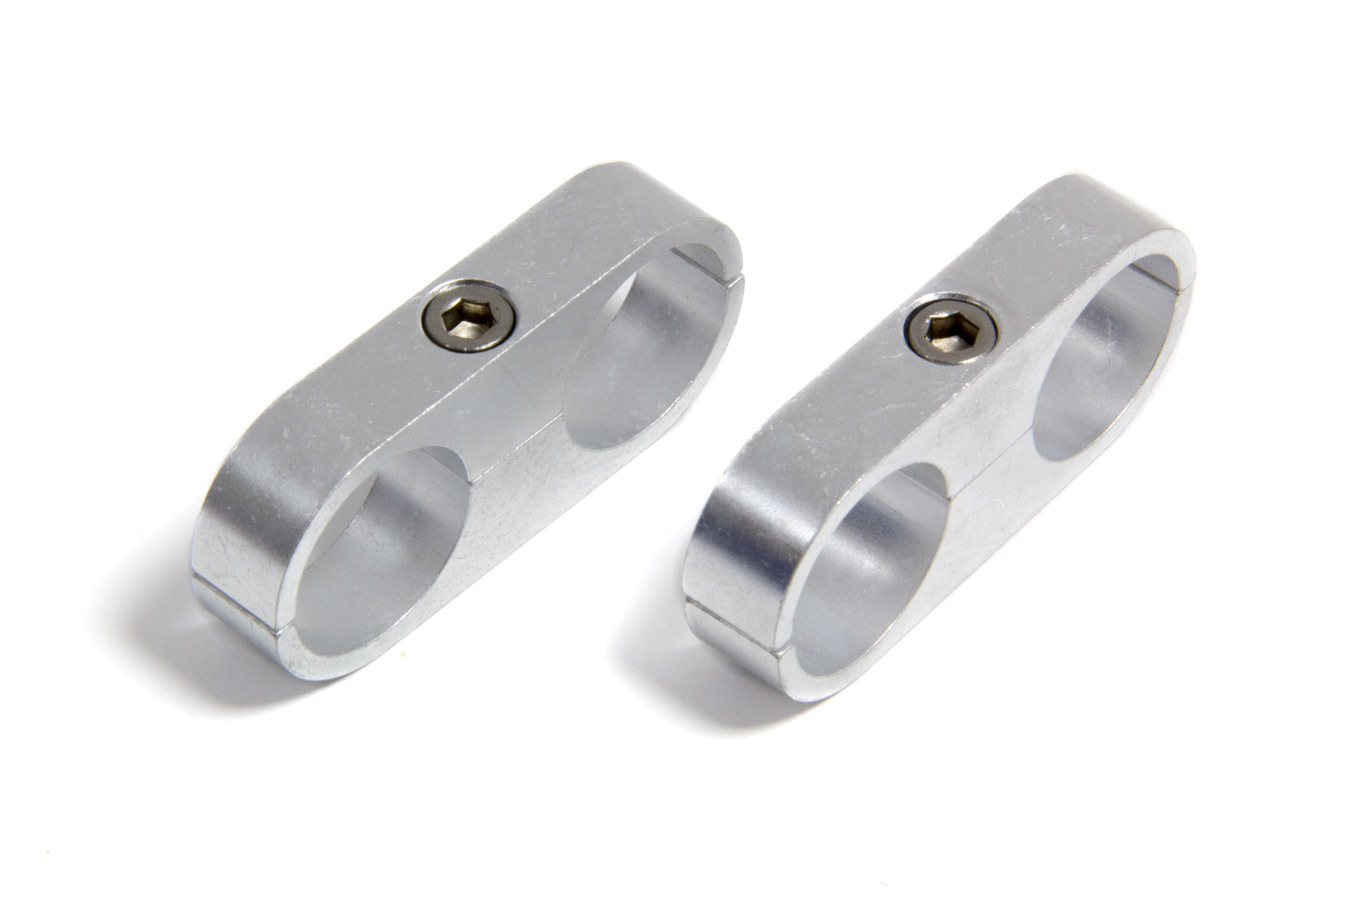 Earls 167216ERL Hose / Tube Separators, Two 1.000 in Holes, Aluminum, Polished, Pair